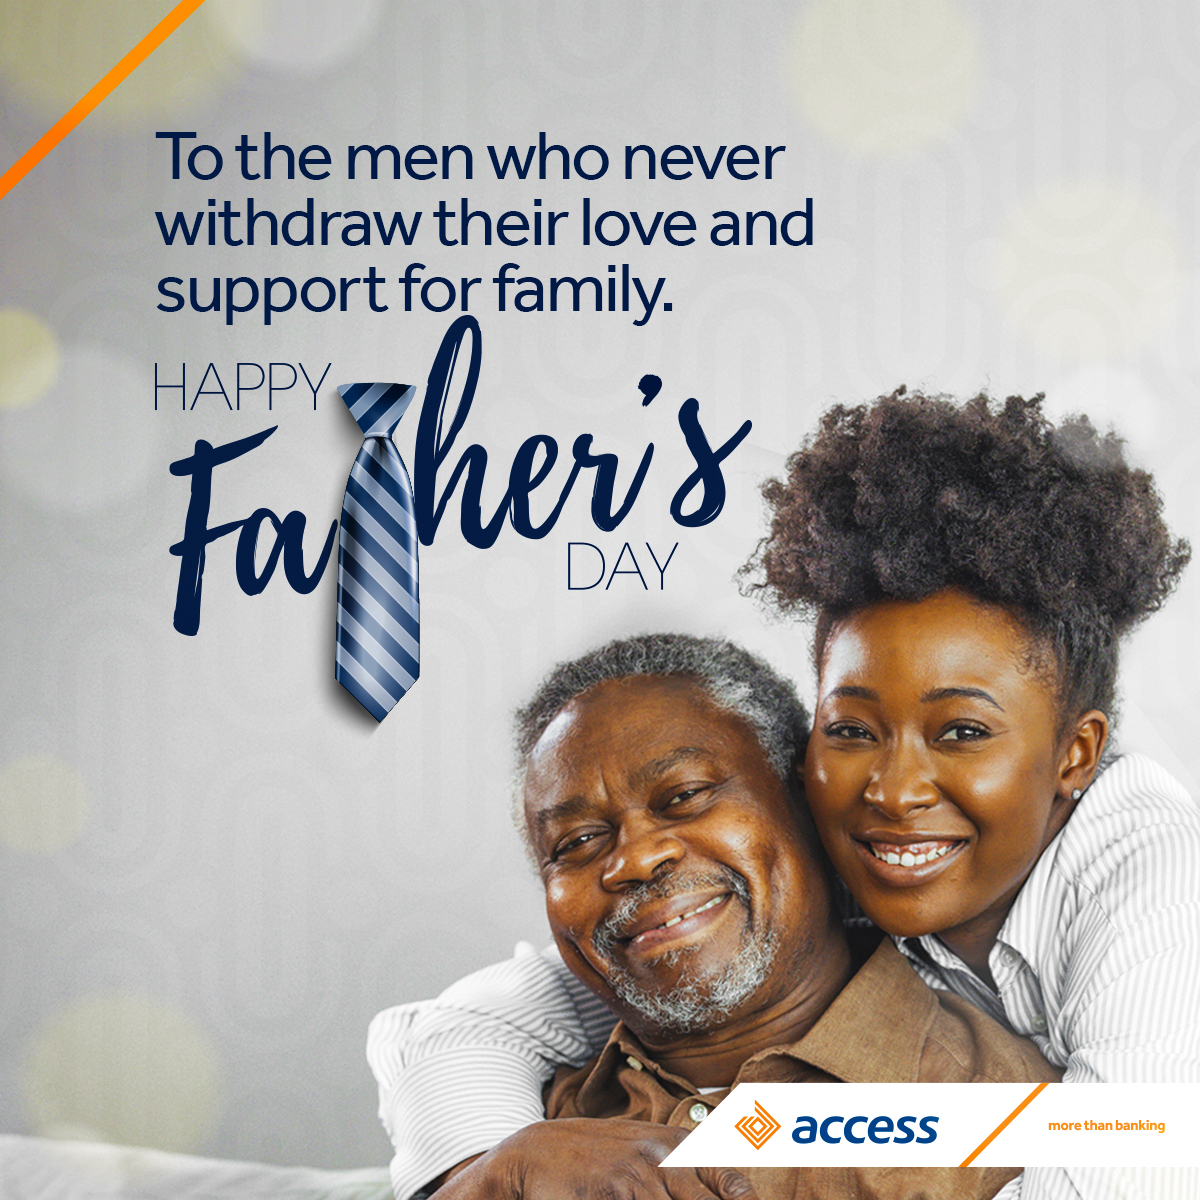 In recognition and celebration of the ones we can always bank on...

Happy Father's Day from all of us @ Access Bank🙍🏽‍♂️💪🏽🍾🥂

#AccessBank #MorethanBanking #Fathersday